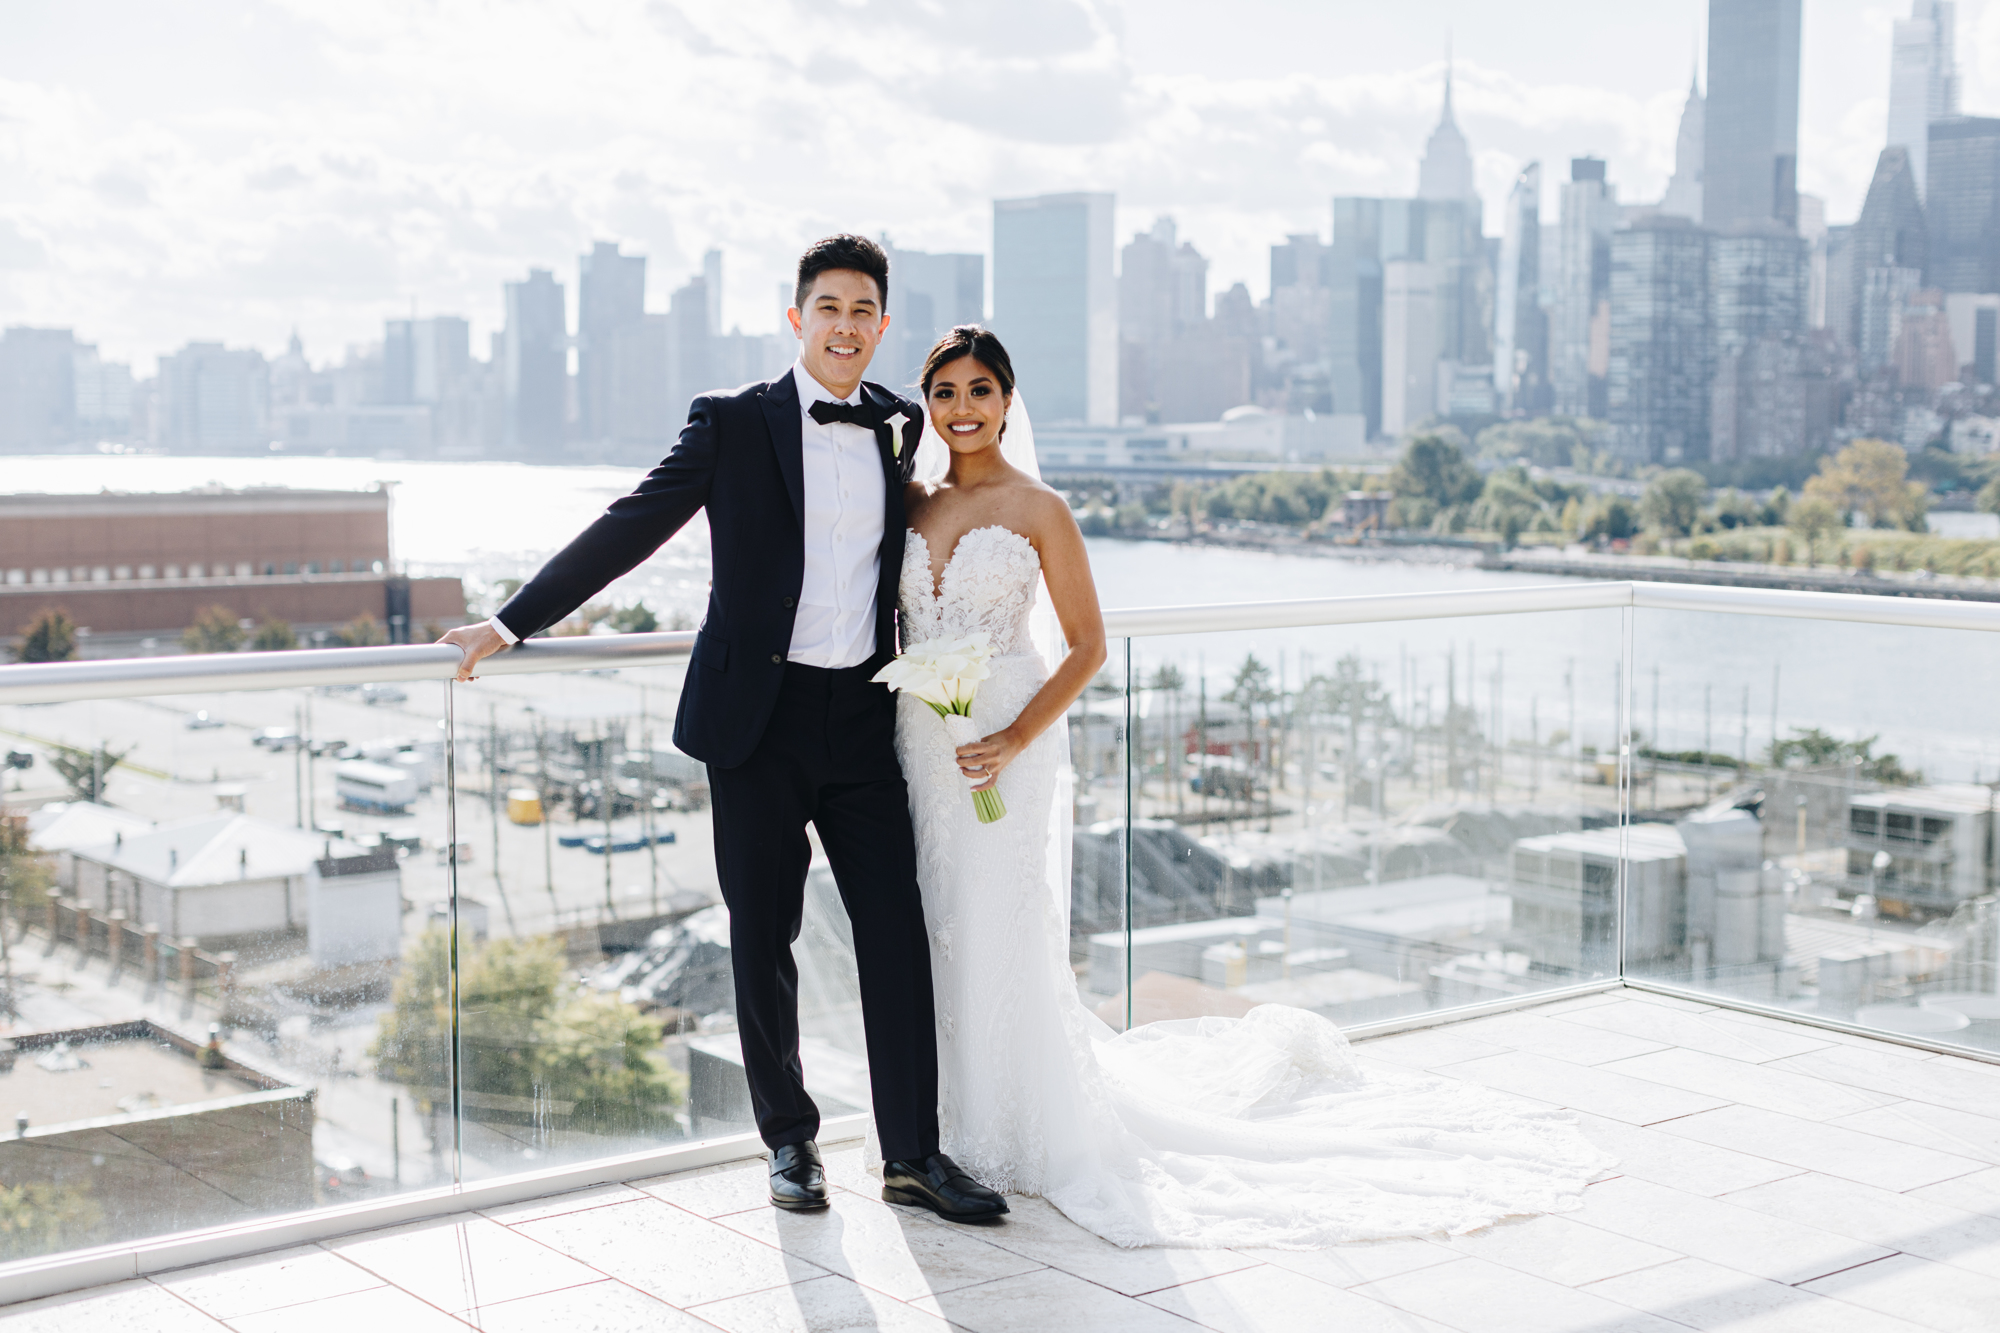 Ravel Hotel wedding in LIC with gorgeous rooftop photos